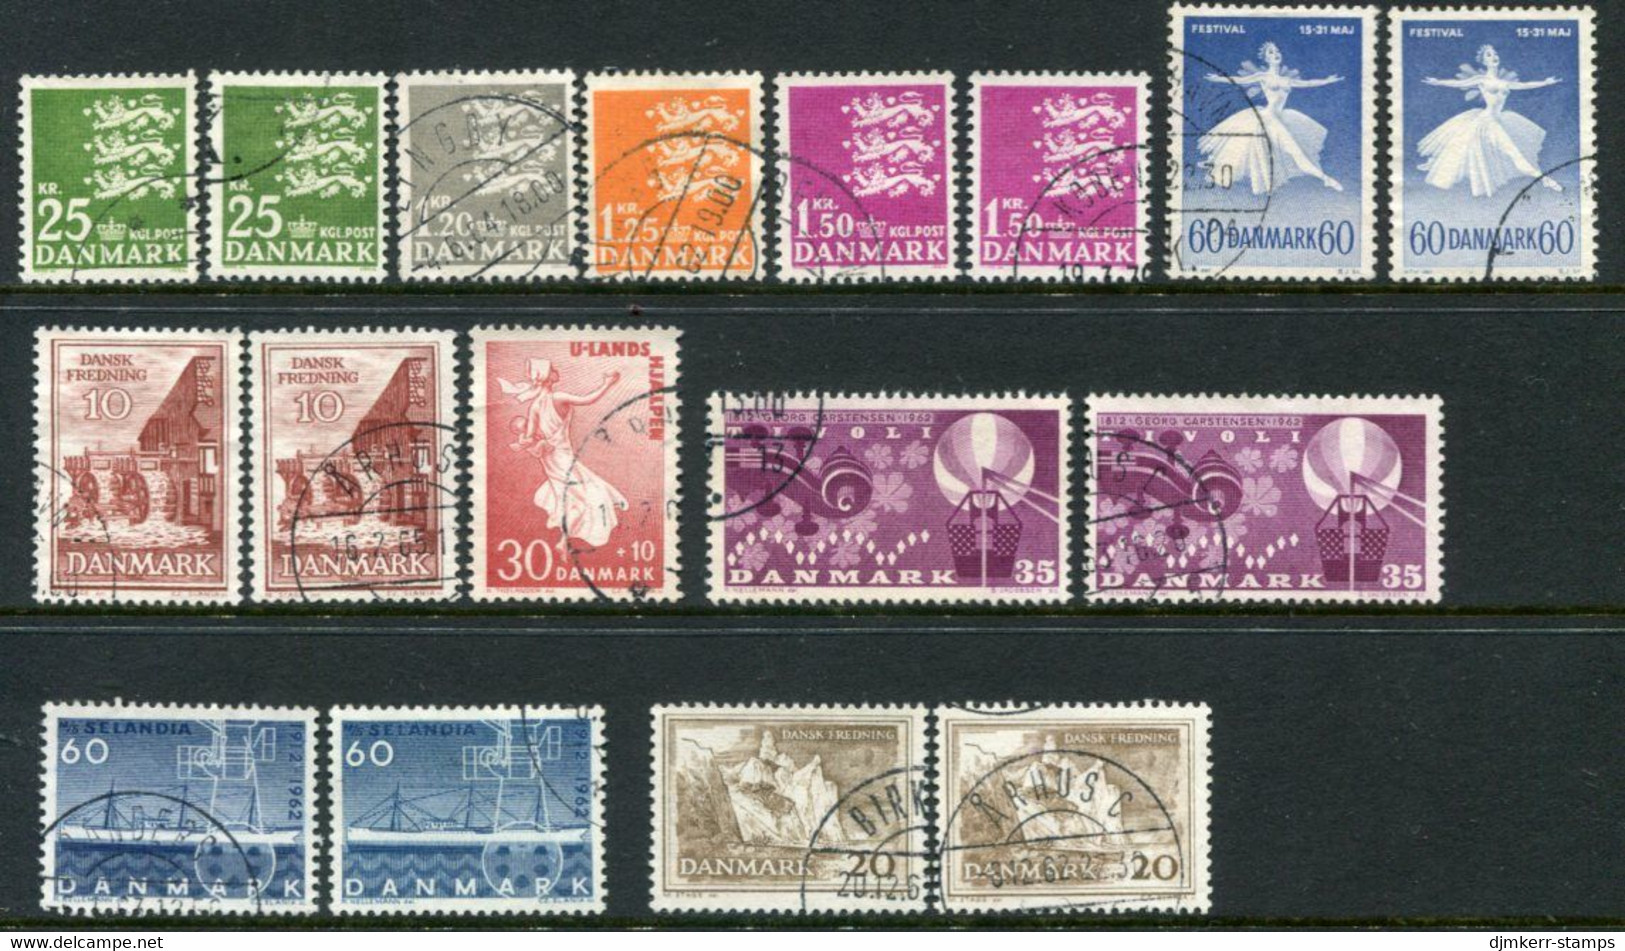 DENMARK 1962 Complete Issues With Ordinary And Fluorescent Papers, Used Michel 399x-408y - Oblitérés